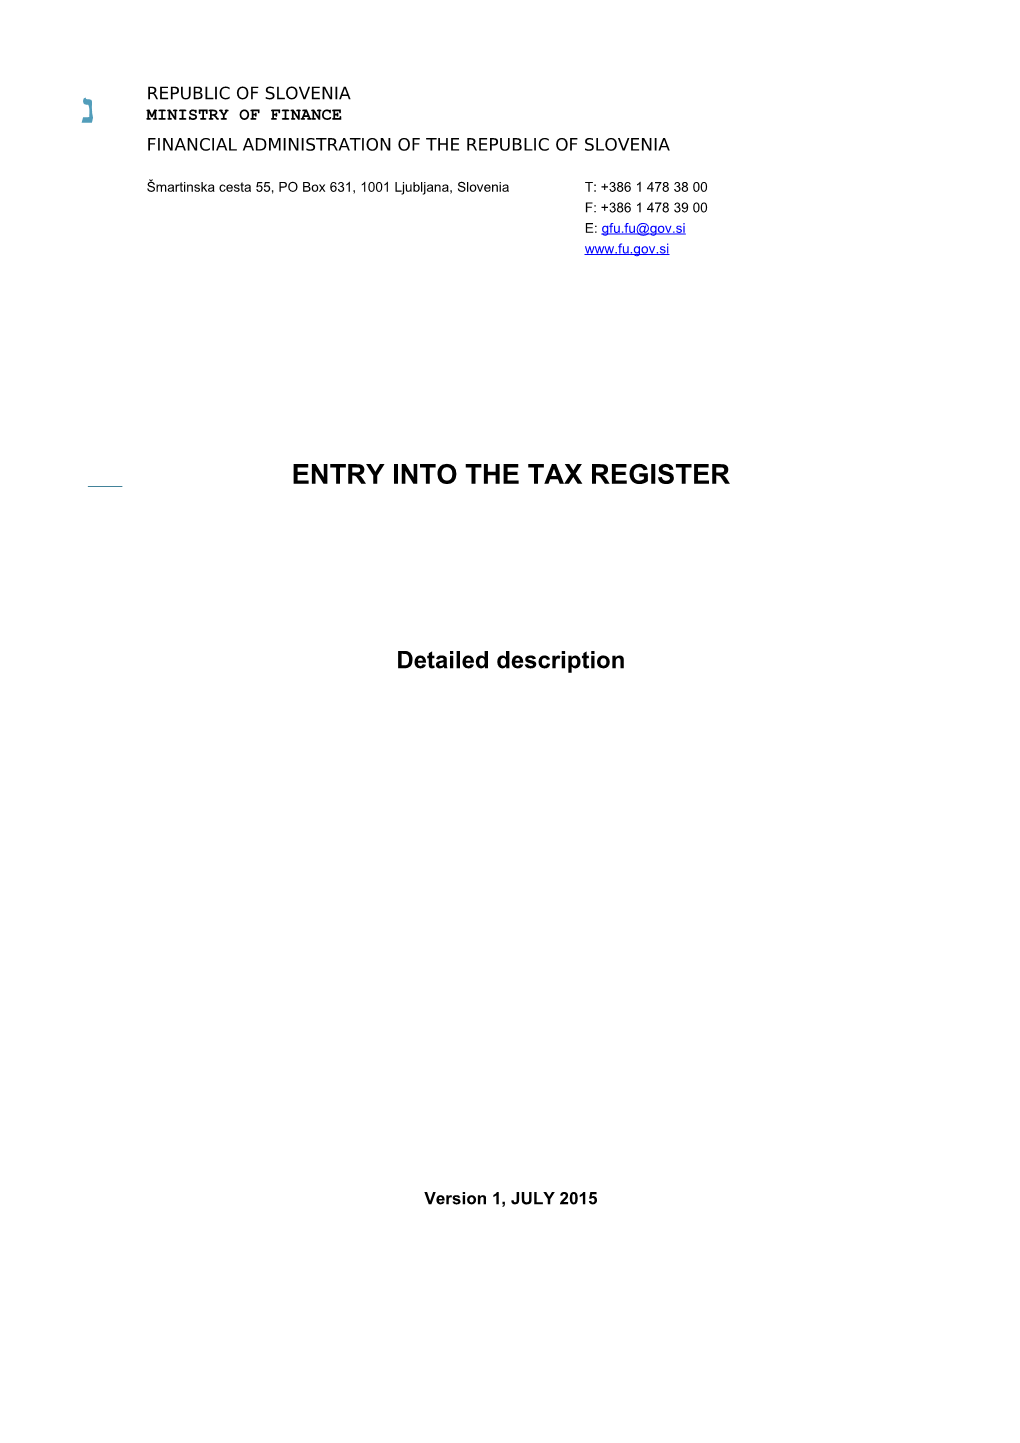 Entry Into the Tax Register